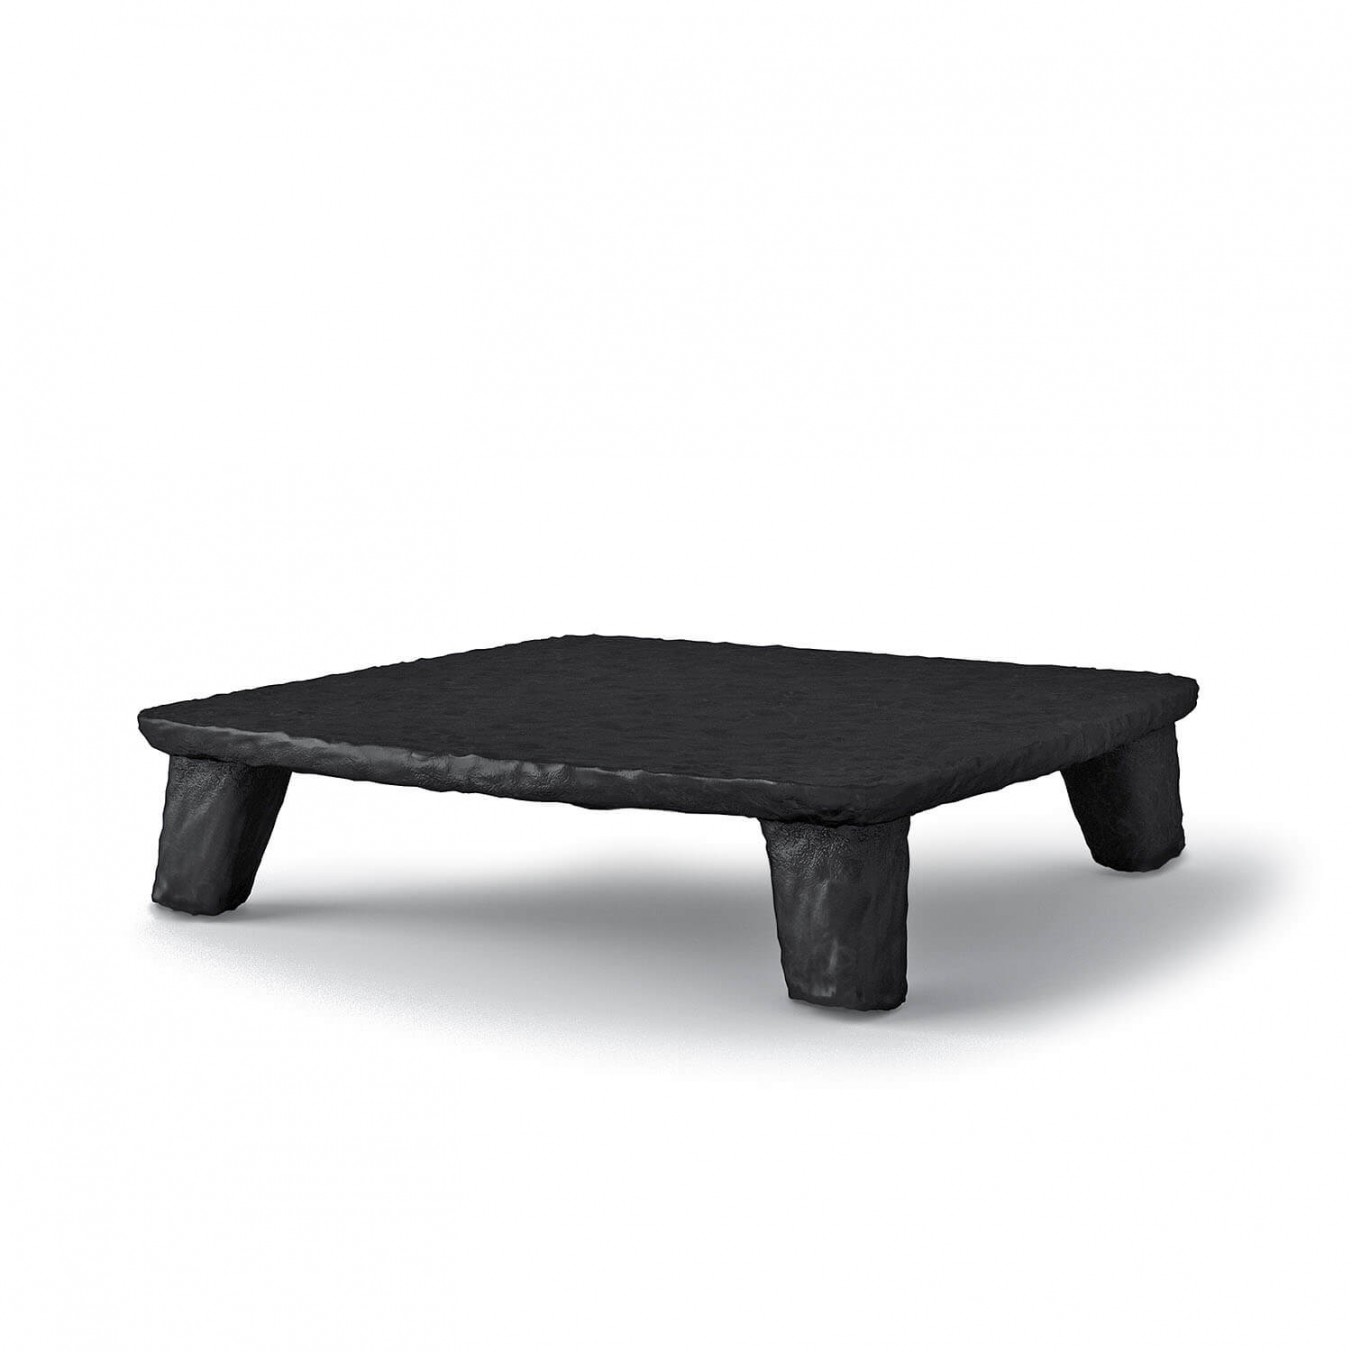 ZTISTA coffee table